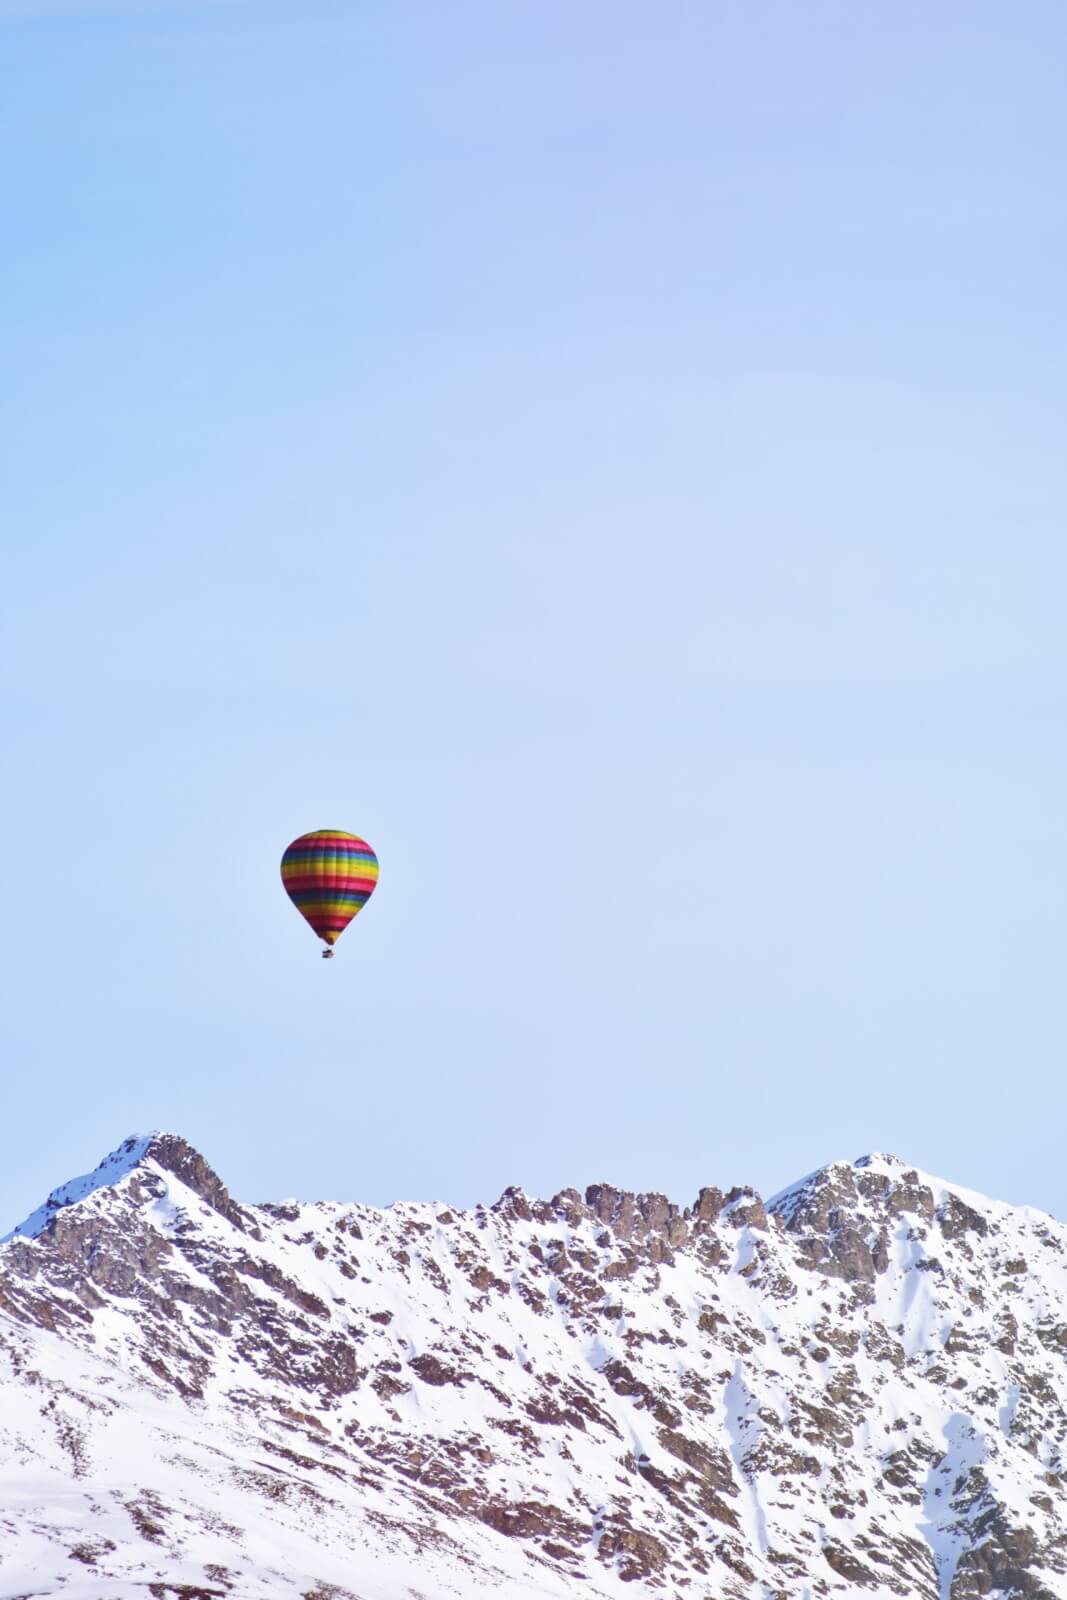 Hot air balloon over snow mountain peaks with the sky in the background